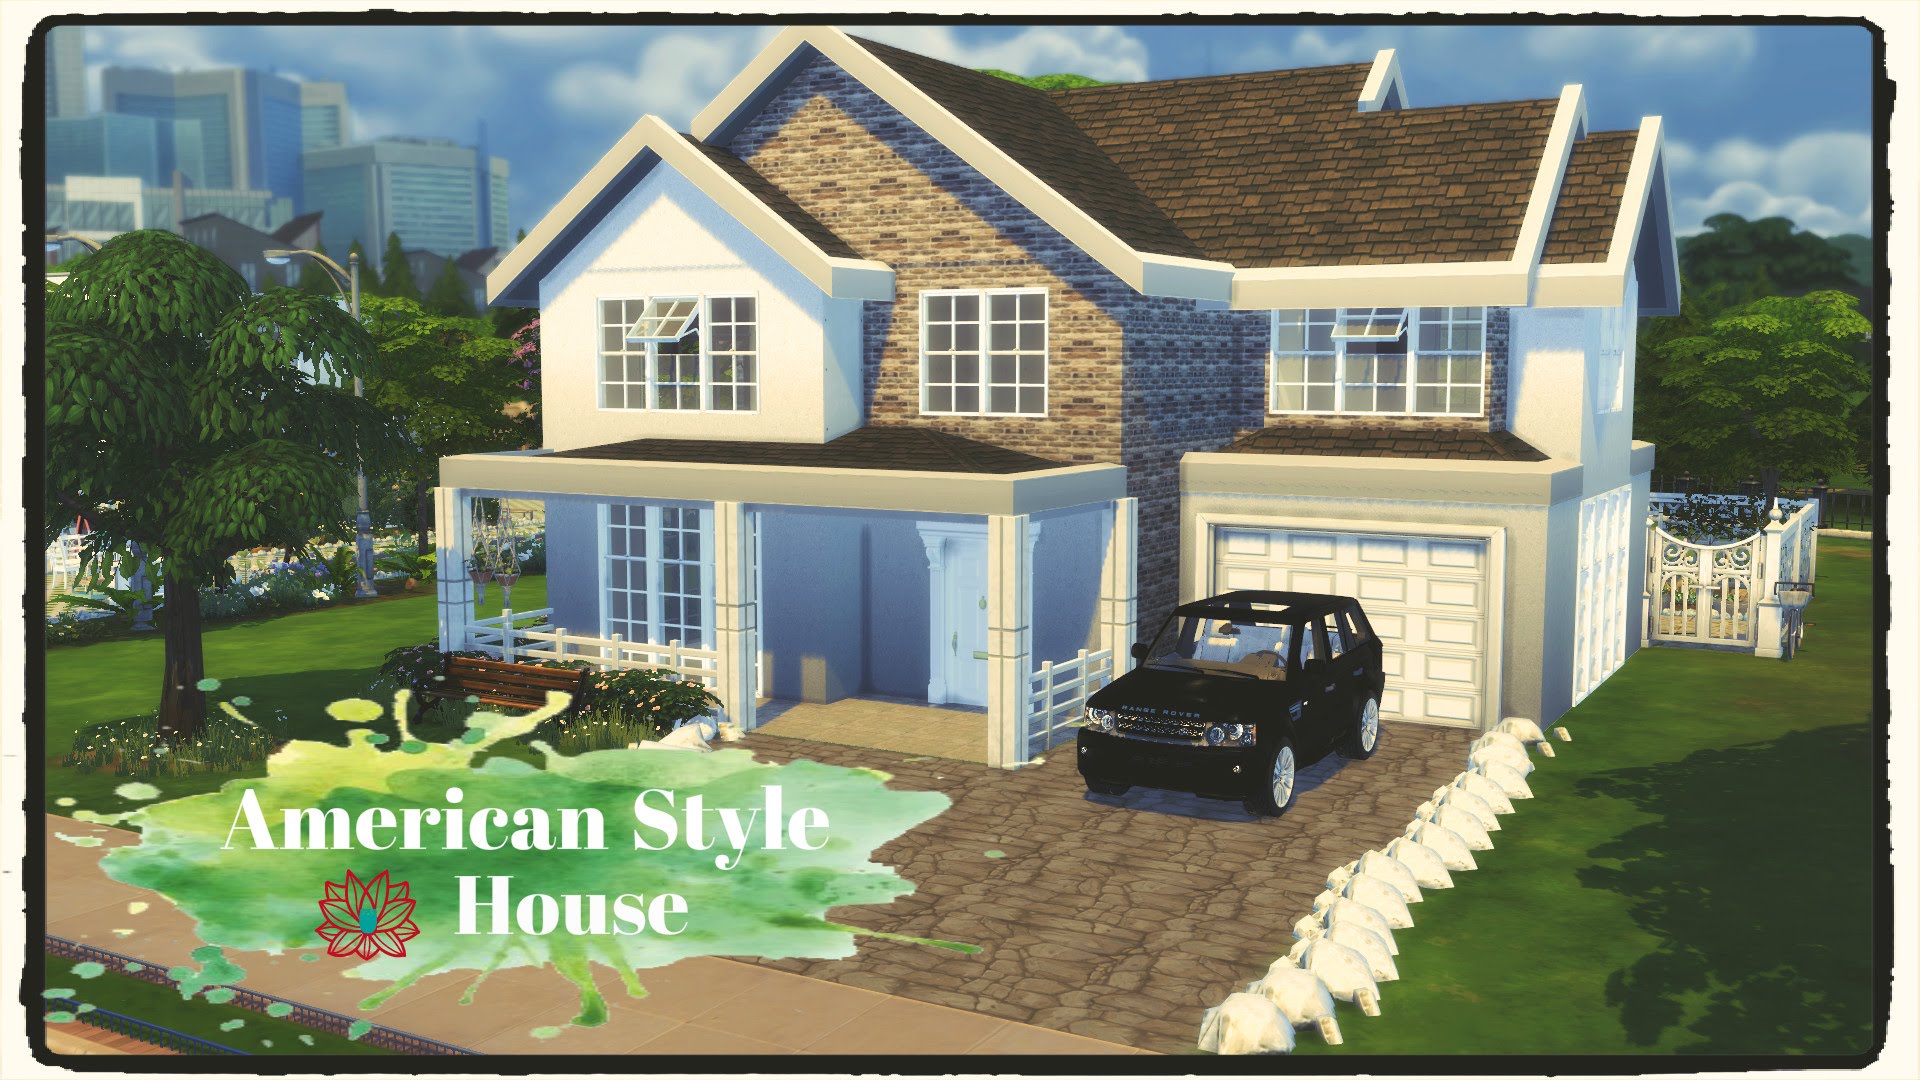 Sims 4 - American Style House (Build & Decoration) Part 1/4 - YouTube